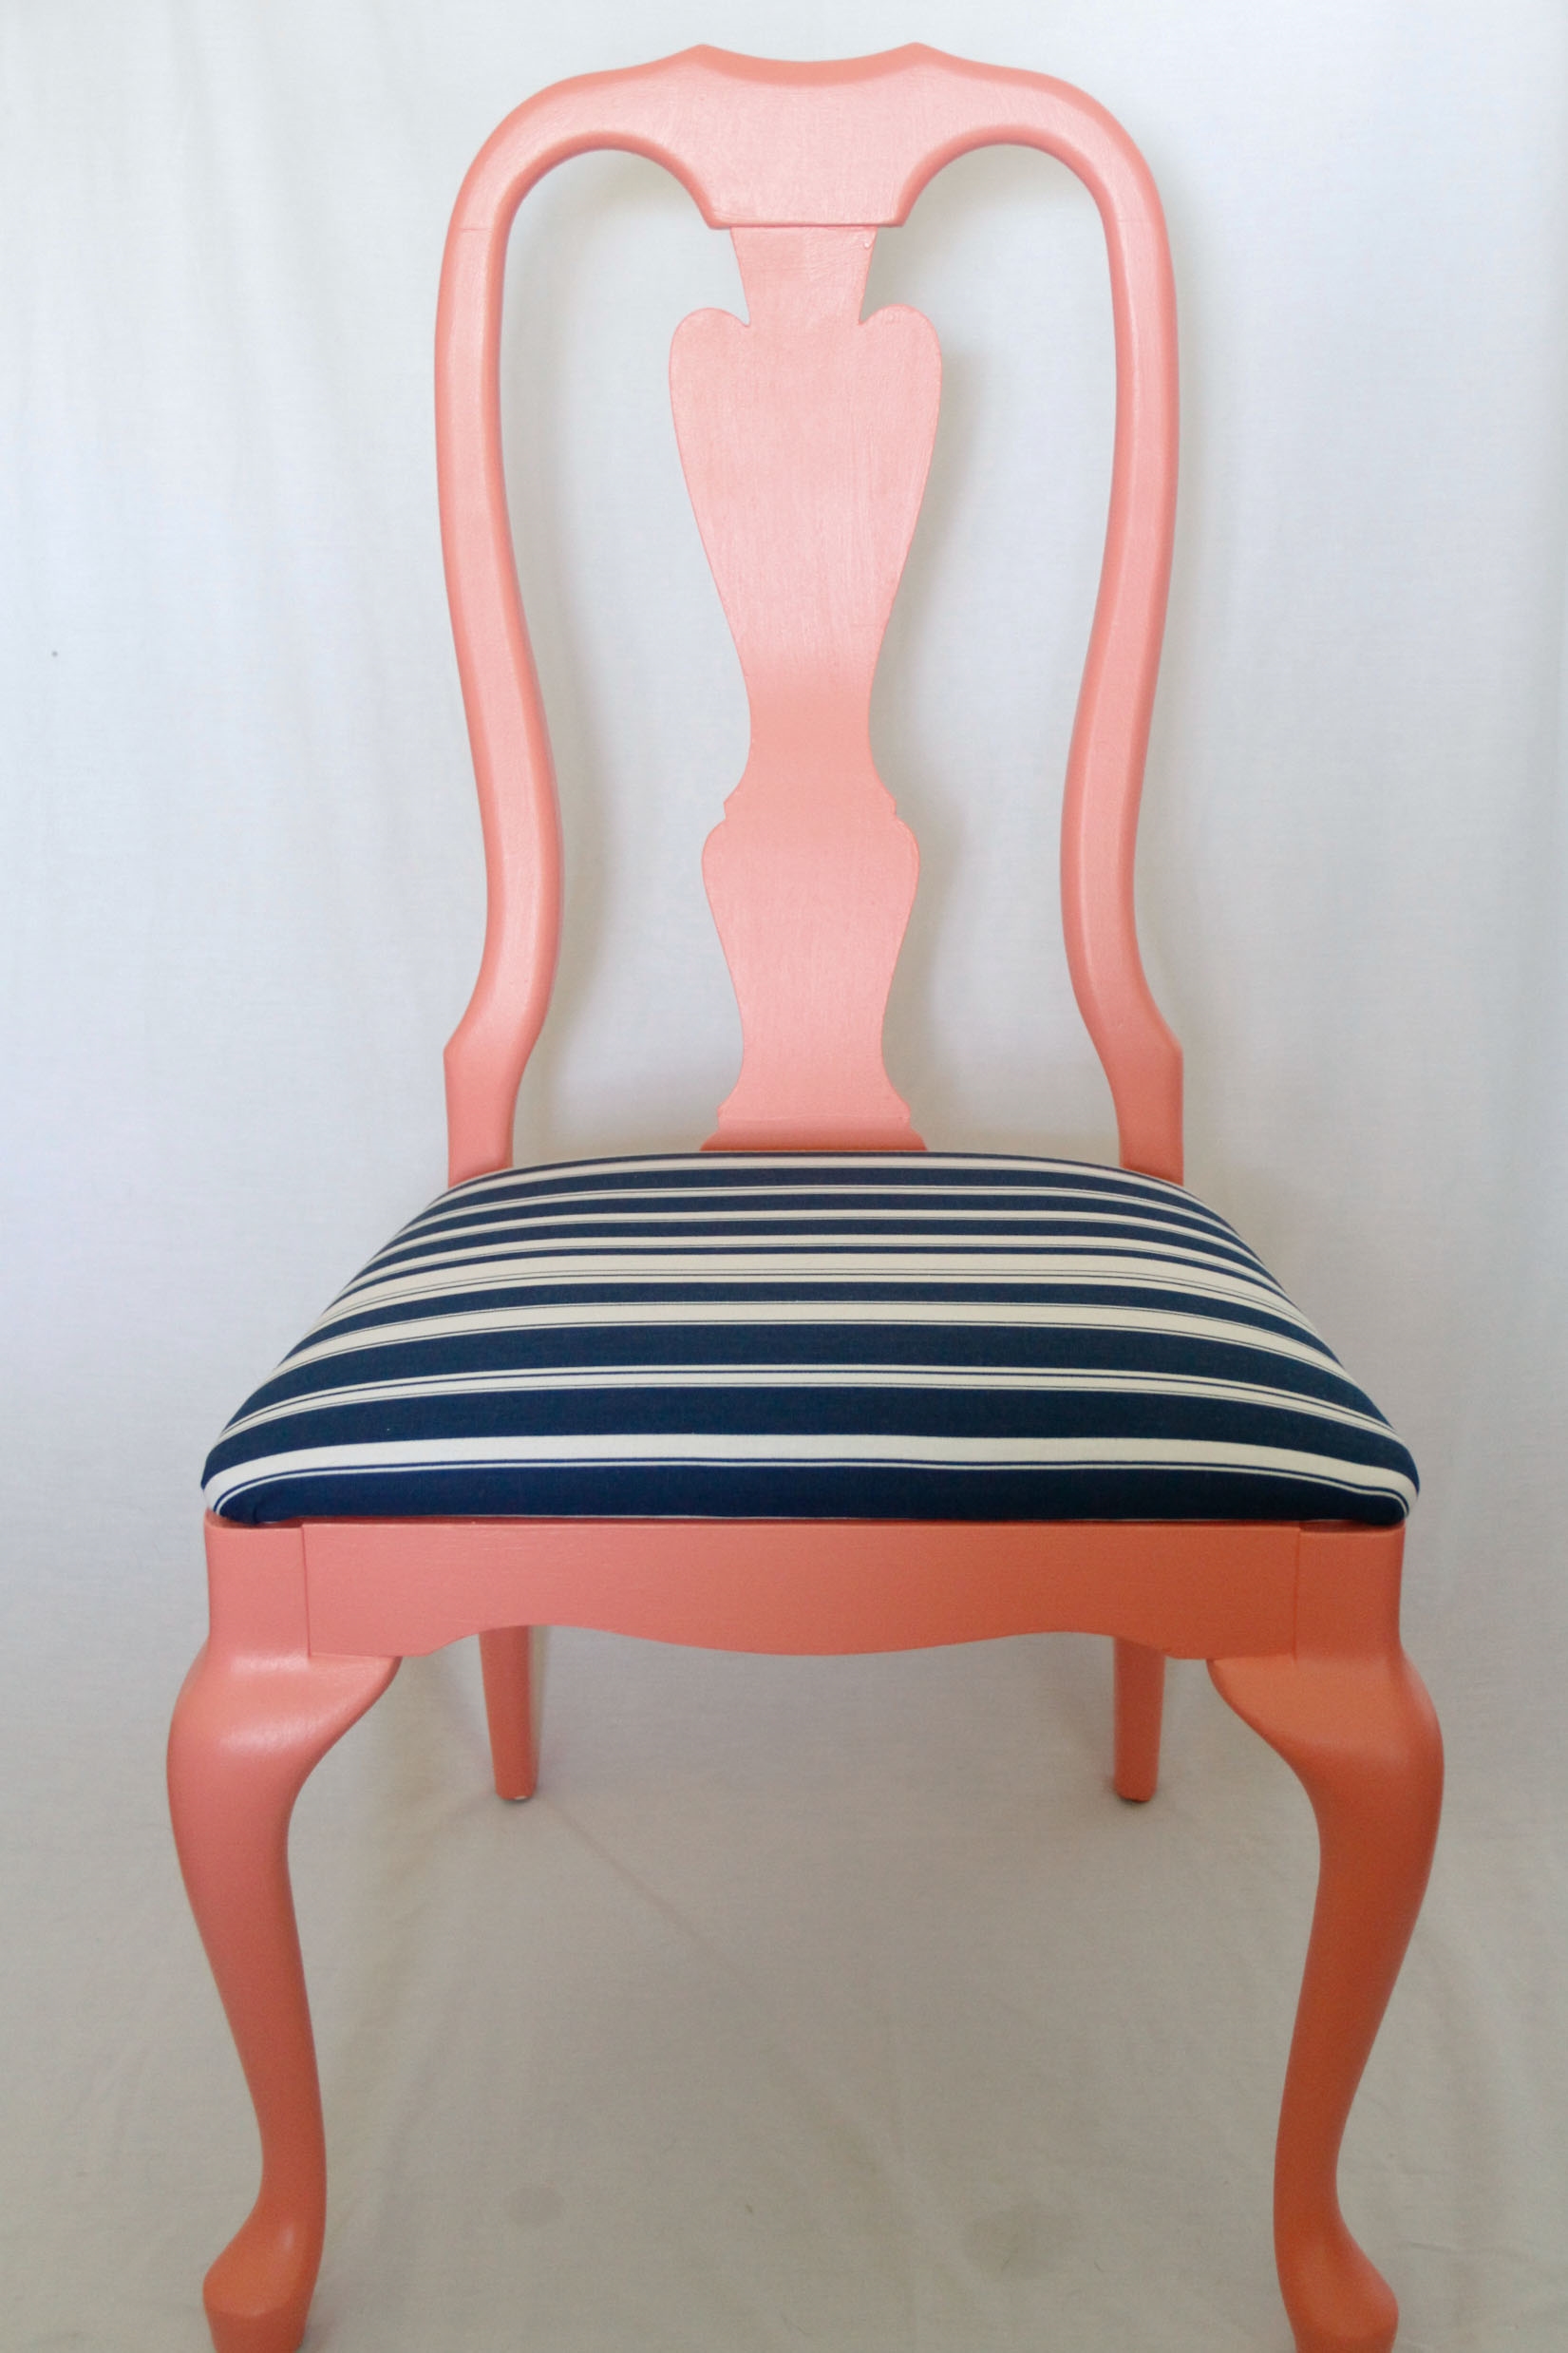 Chair with a pink base and an original pillow